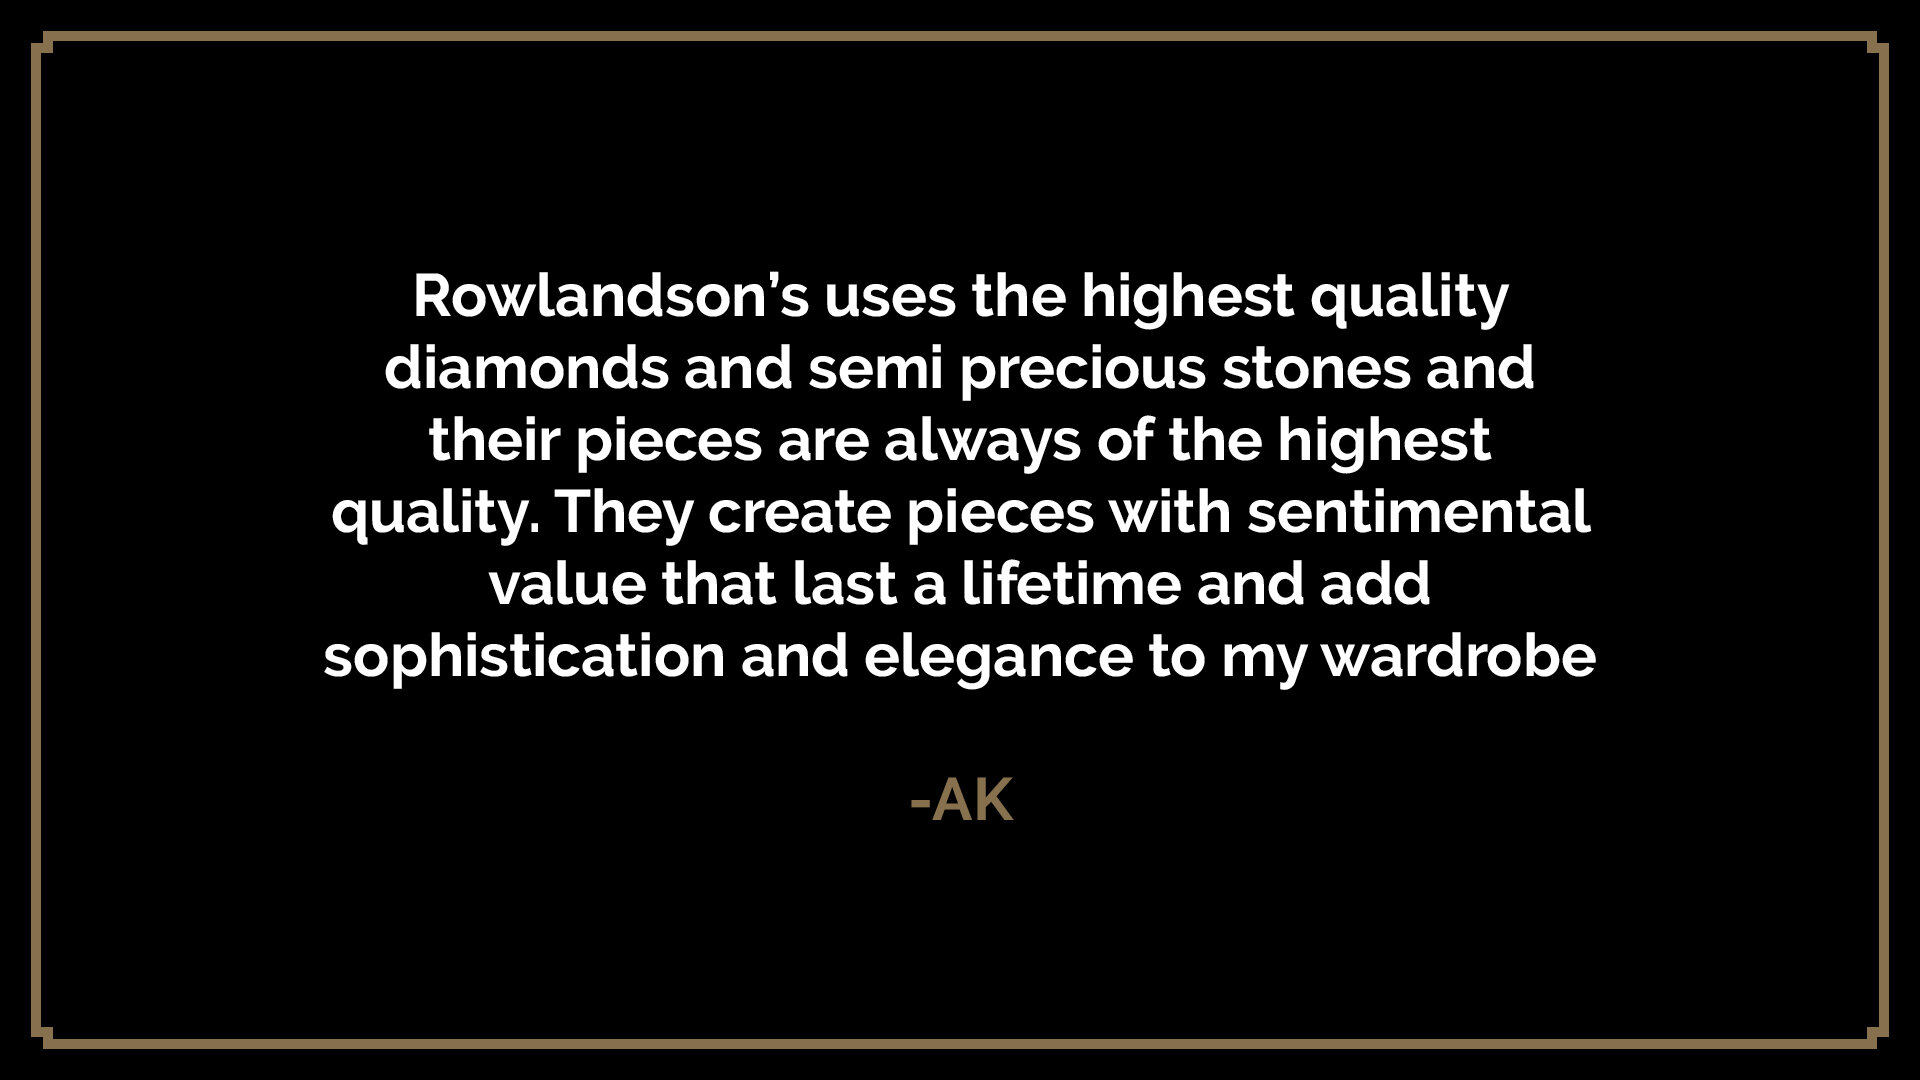  Rowlandson’s uses the highest quality diamonds and semi precious stones and their pieces are always of the highest quality. They create pieces with sentimental value that last a lifetime and add sophistication and elegance to my wardrobe  -AK 